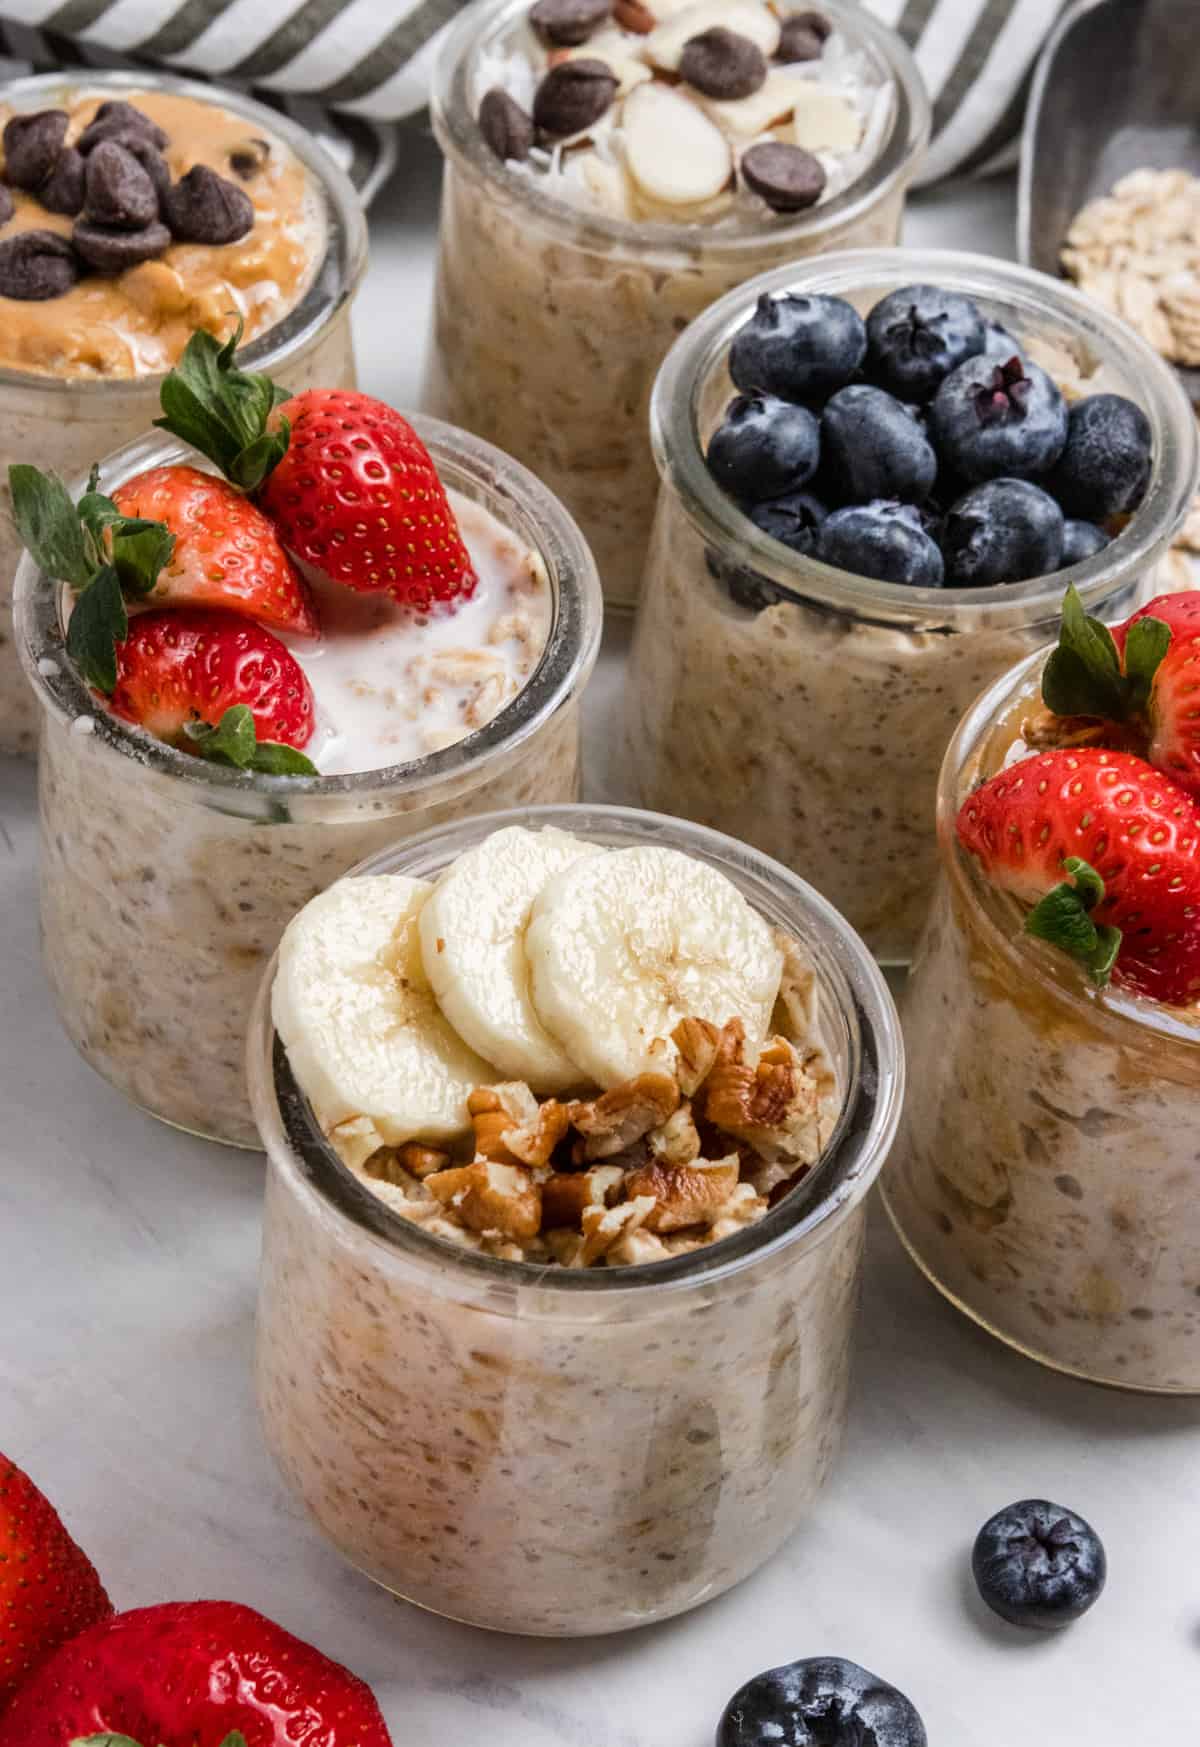 Banana bread oatmeal, strawberry, blueberry and other flavors in glass jars.